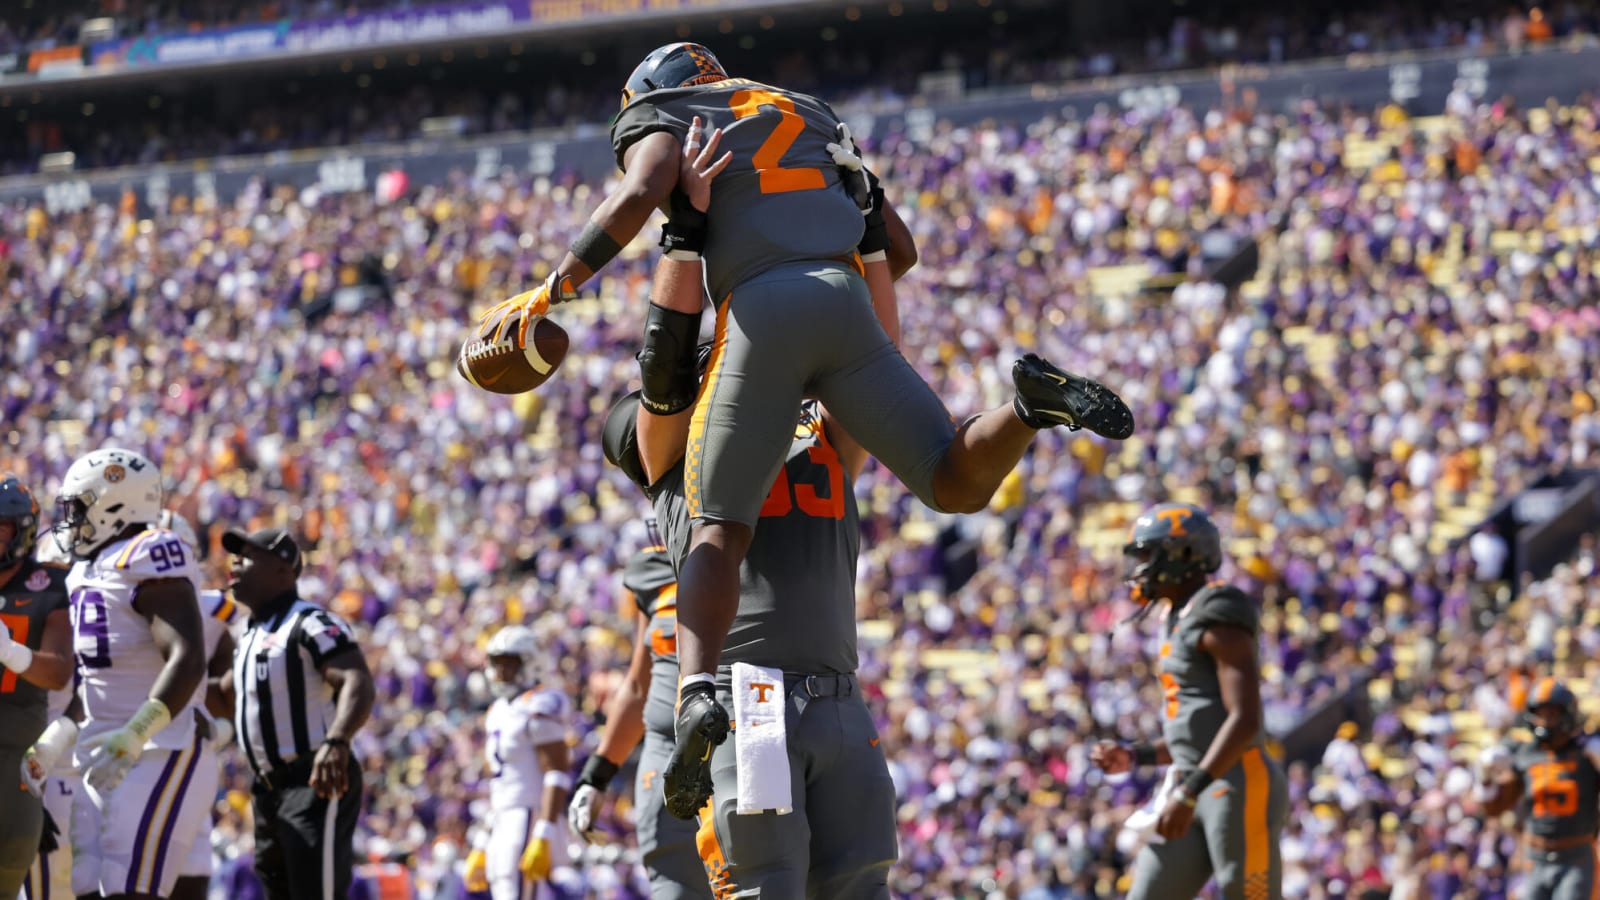 Vols WR takes shot at LSU fans after blowout win in Baton Rouge